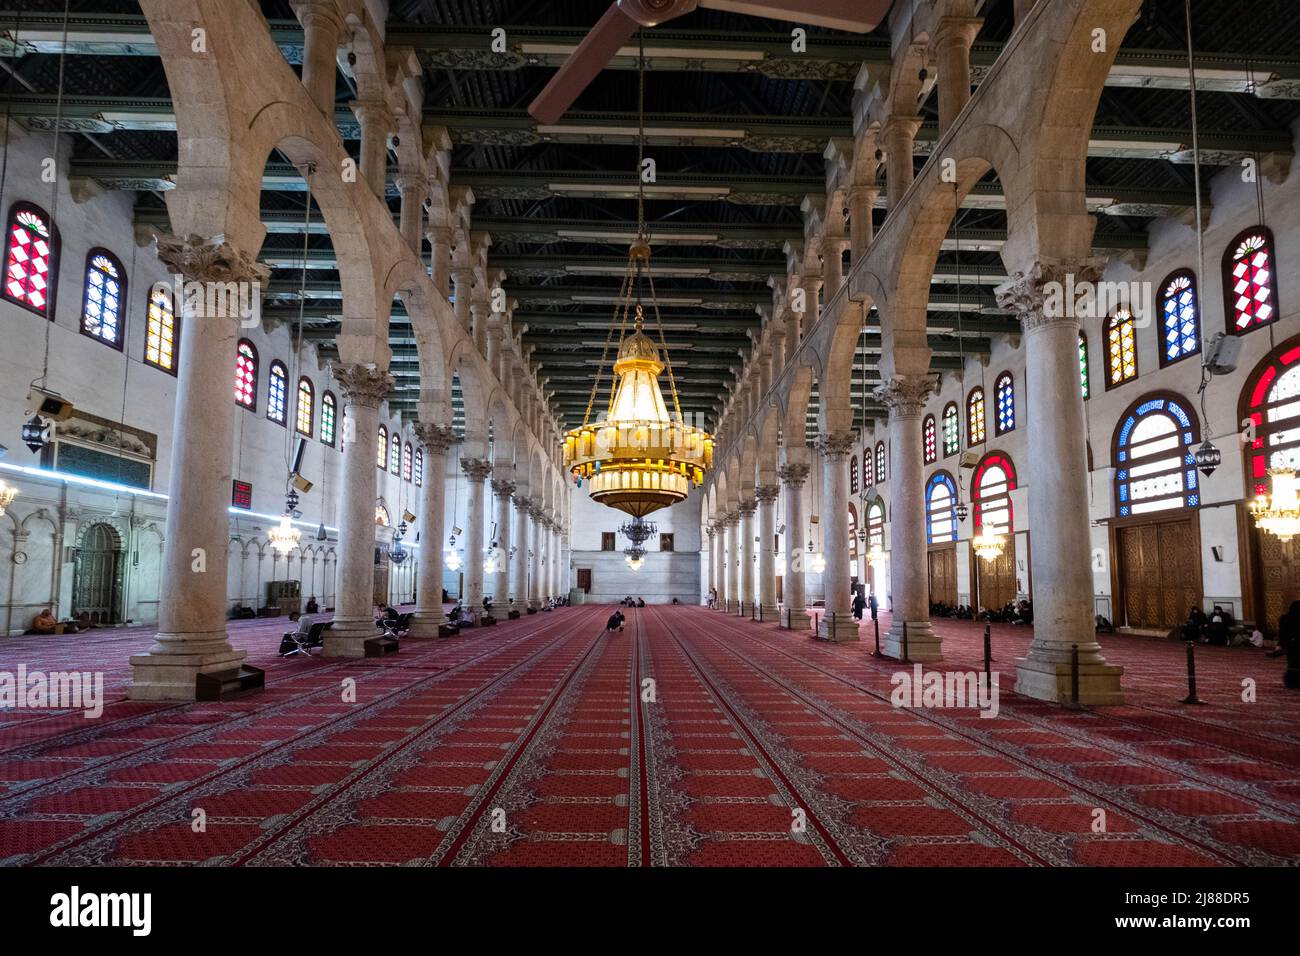 Damascus, Syria -May, 2022: Inside the Umayyad Mosque, also known as the Great Mosque of Damascus Stock Photo